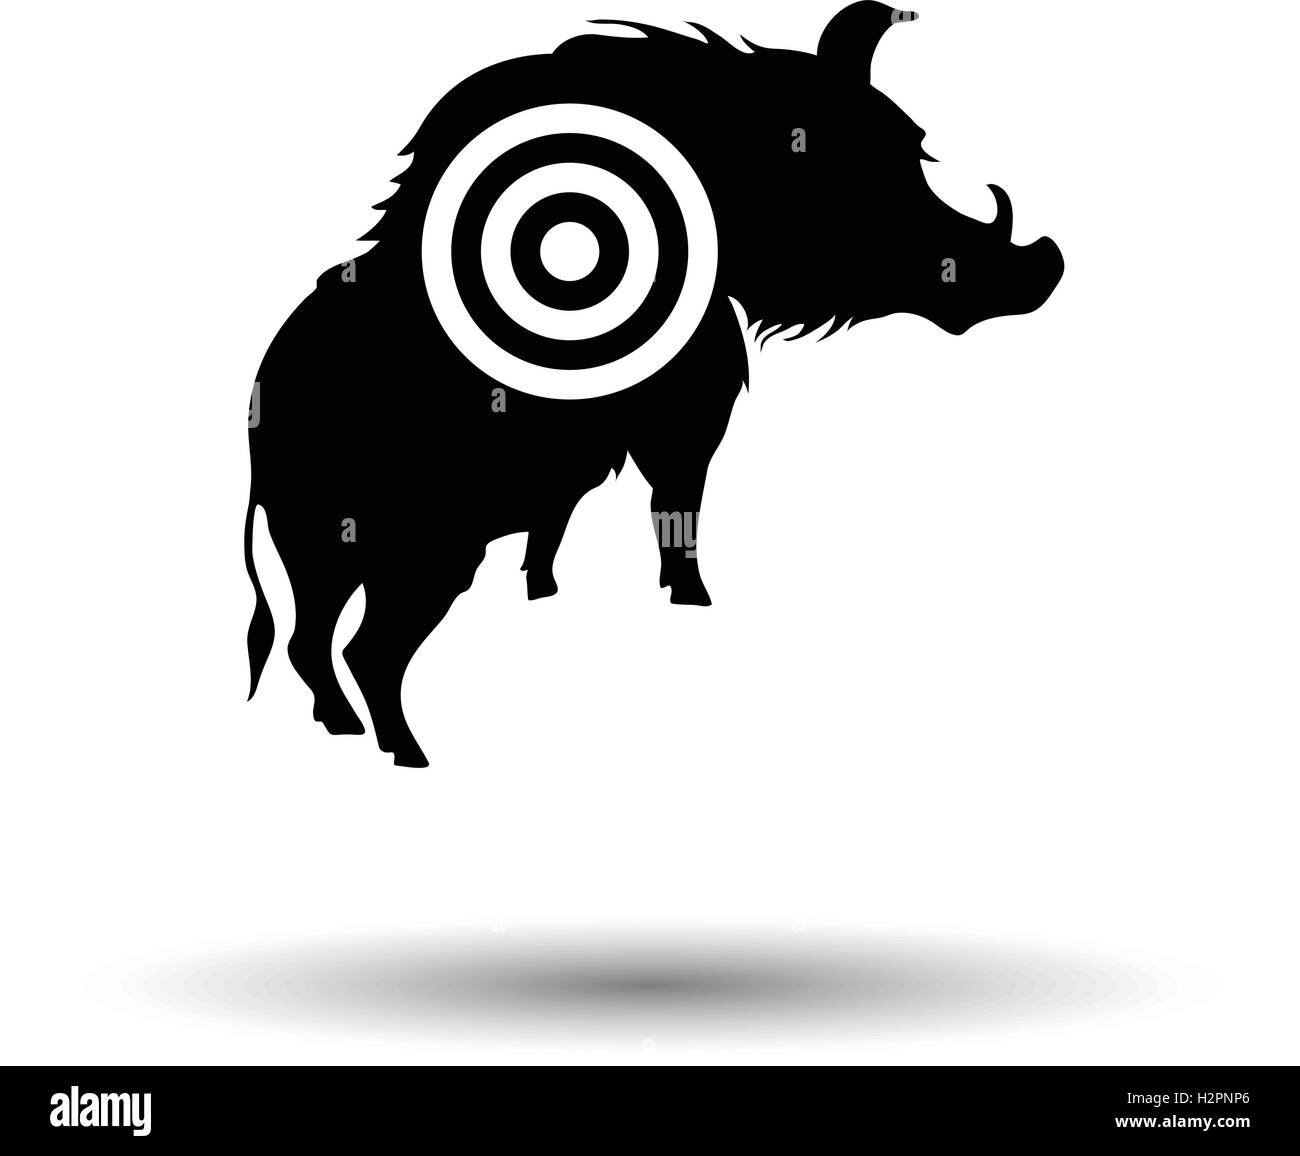 Boar silhouette with target icon. White background with shadow design. Vector illustration. Stock Vector